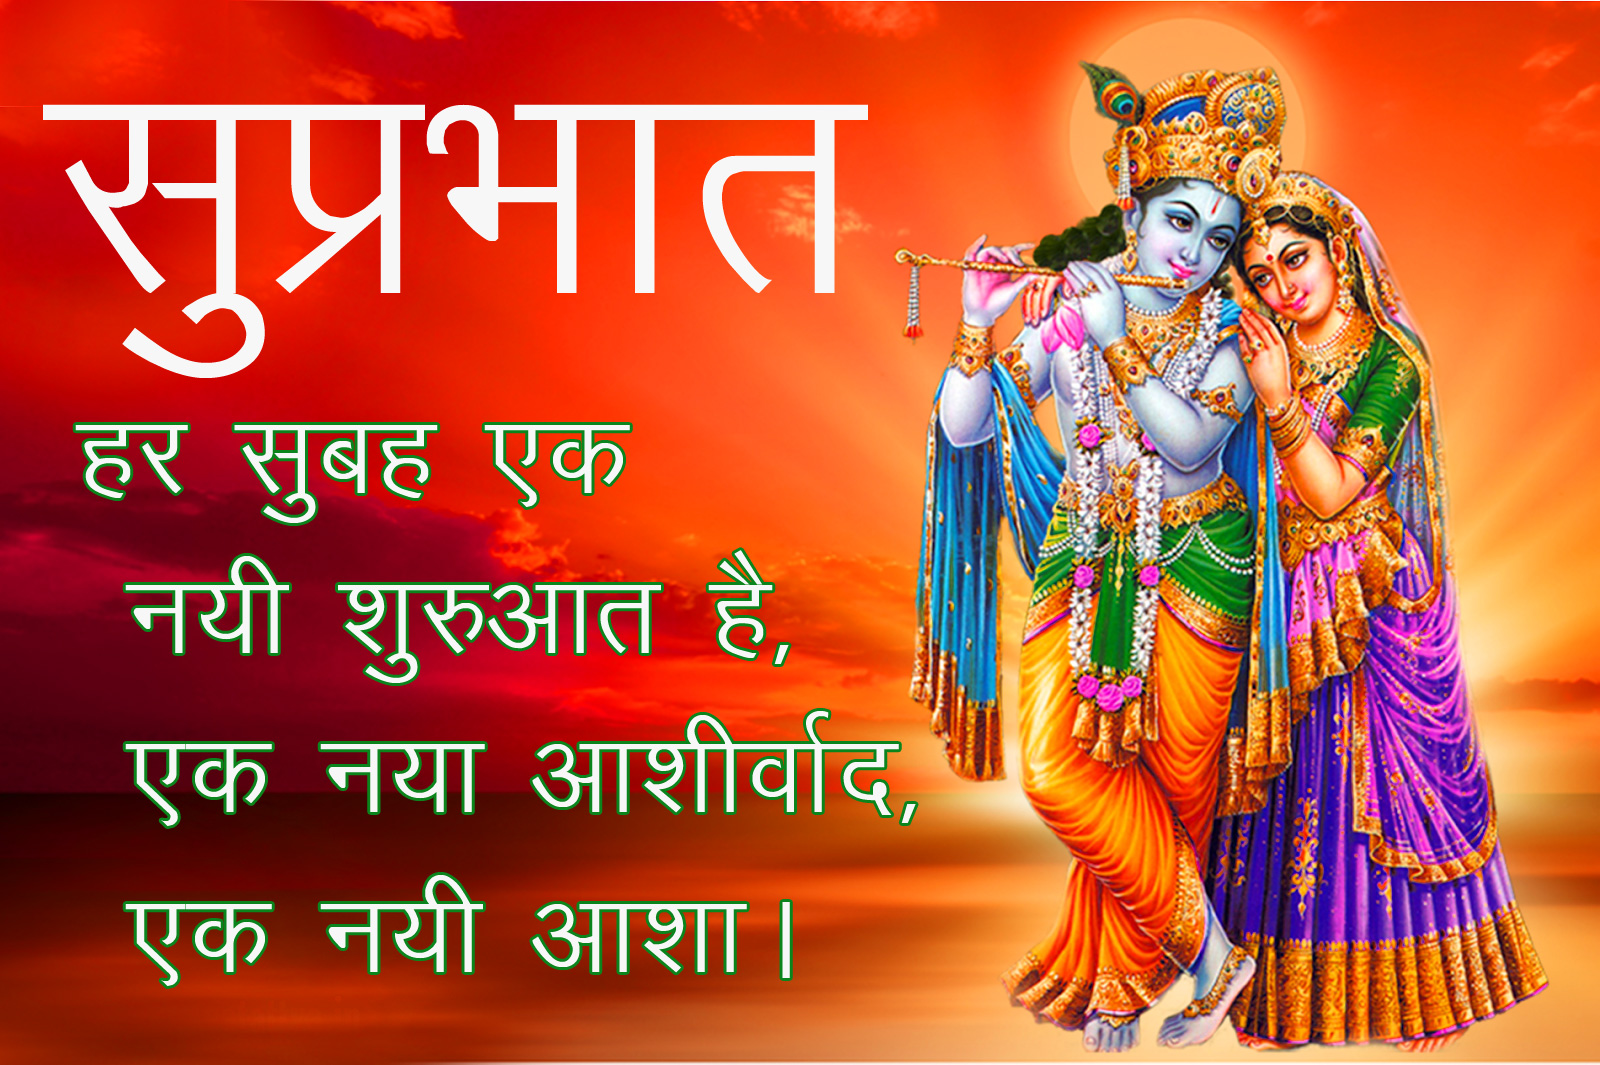 Radha krishna Good Morning Images With Quotes